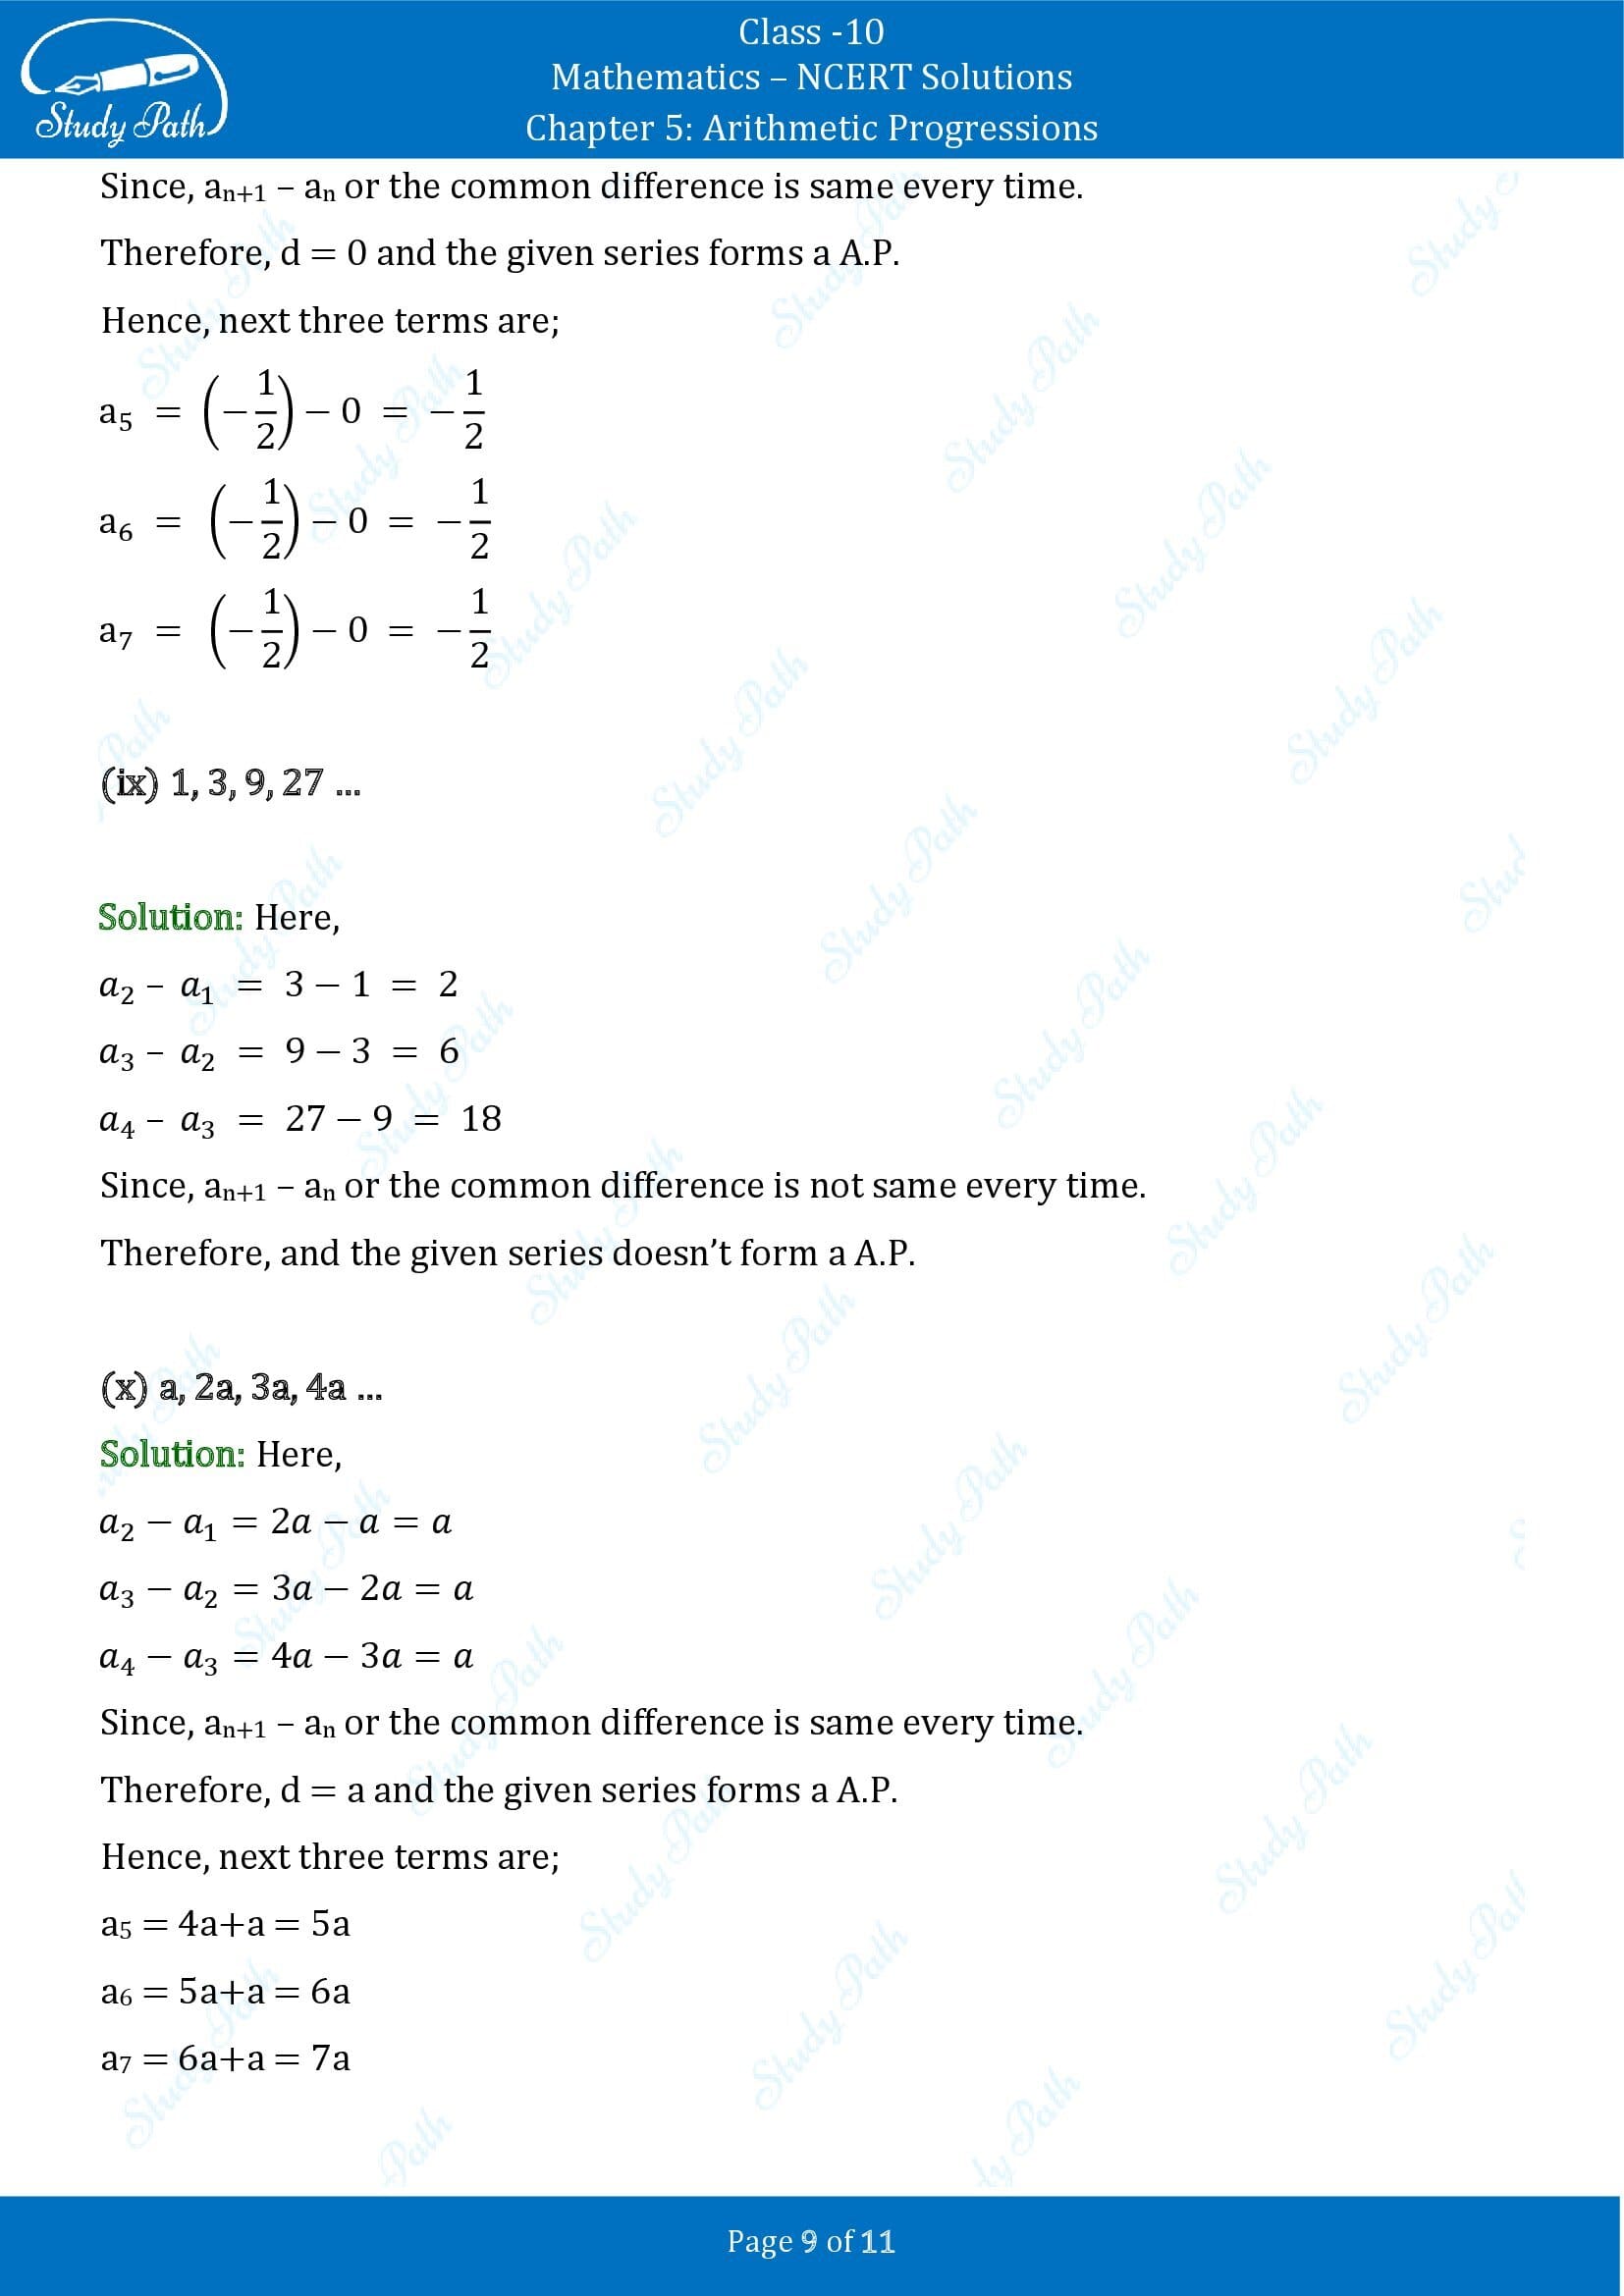 NCERT Solutions for Class 10 Maths Chapter 5 Arithmetic Progressions Exercise 5.1 00009